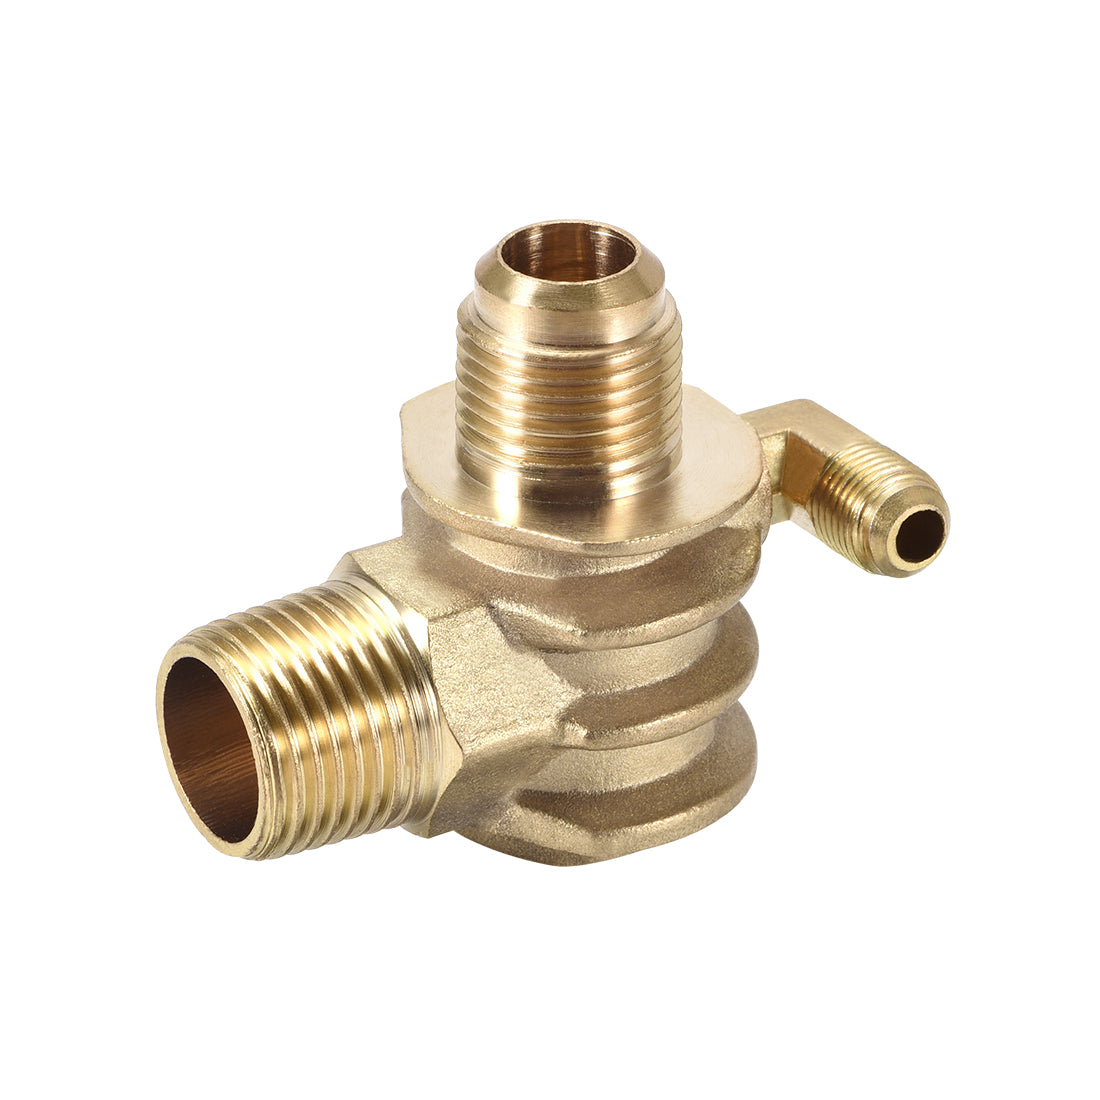 uxcell Uxcell Air Compressor Check Valve 90 Degree Right Male Threaded Removable Brass G1/2" x 3/4"-16UNF x M10